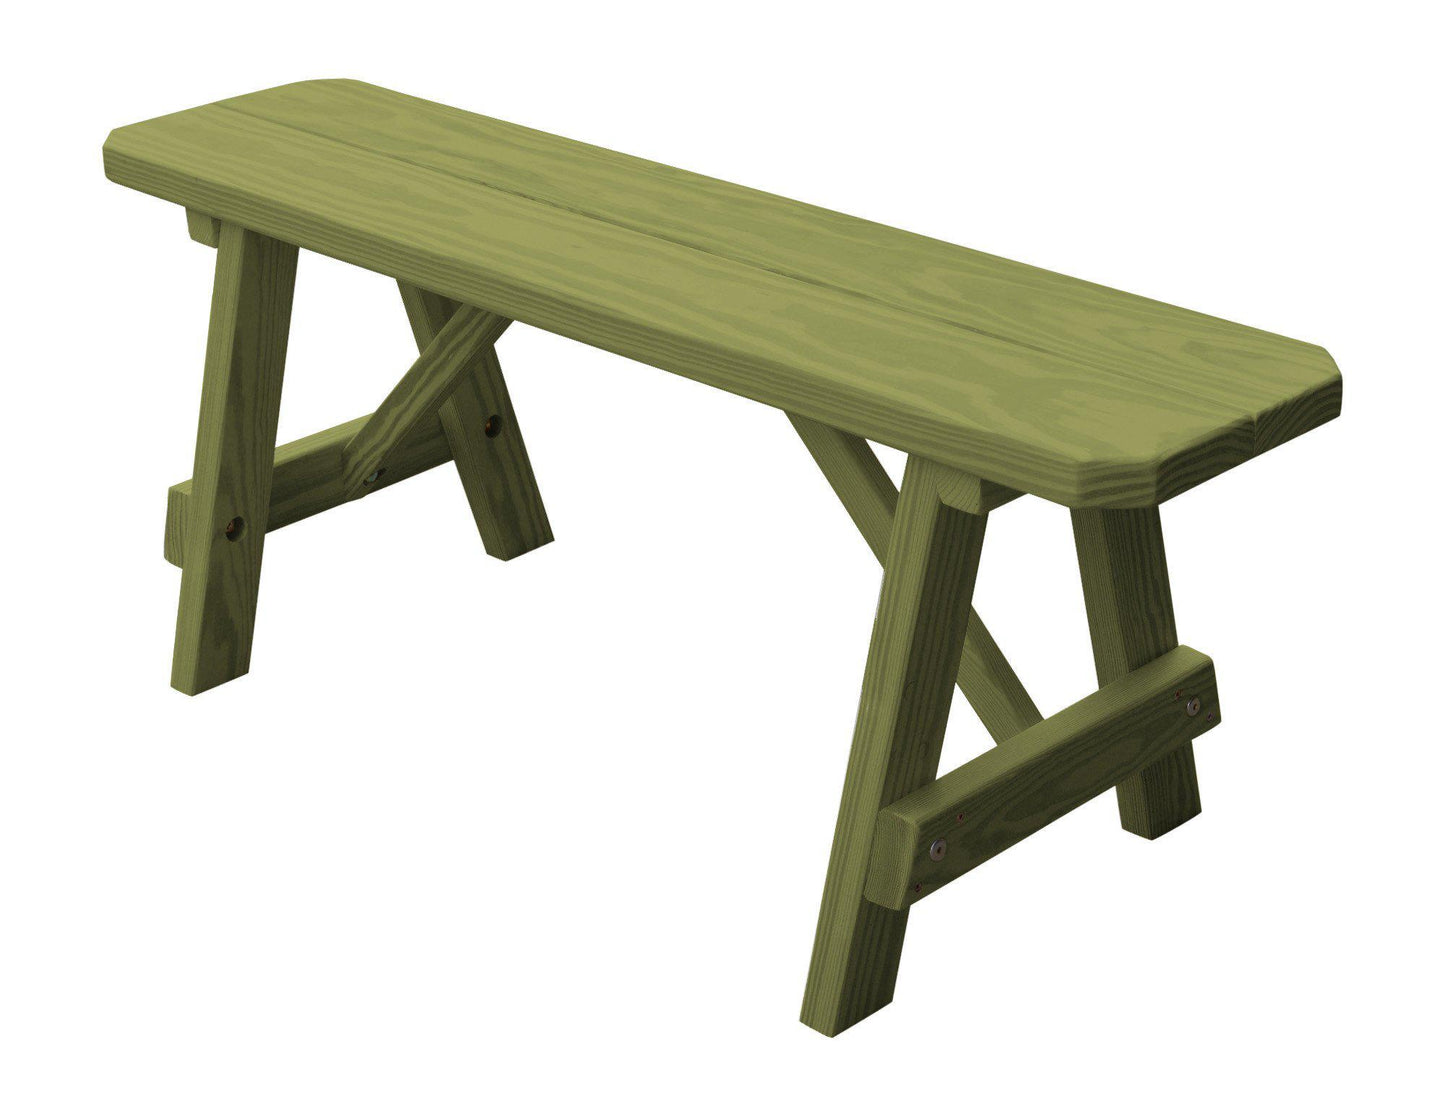 A&L Furniture Co. Pressure Treated Pine 44" Traditional Bench Only - LEAD TIME TO SHIP 10 BUSINESS DAYS